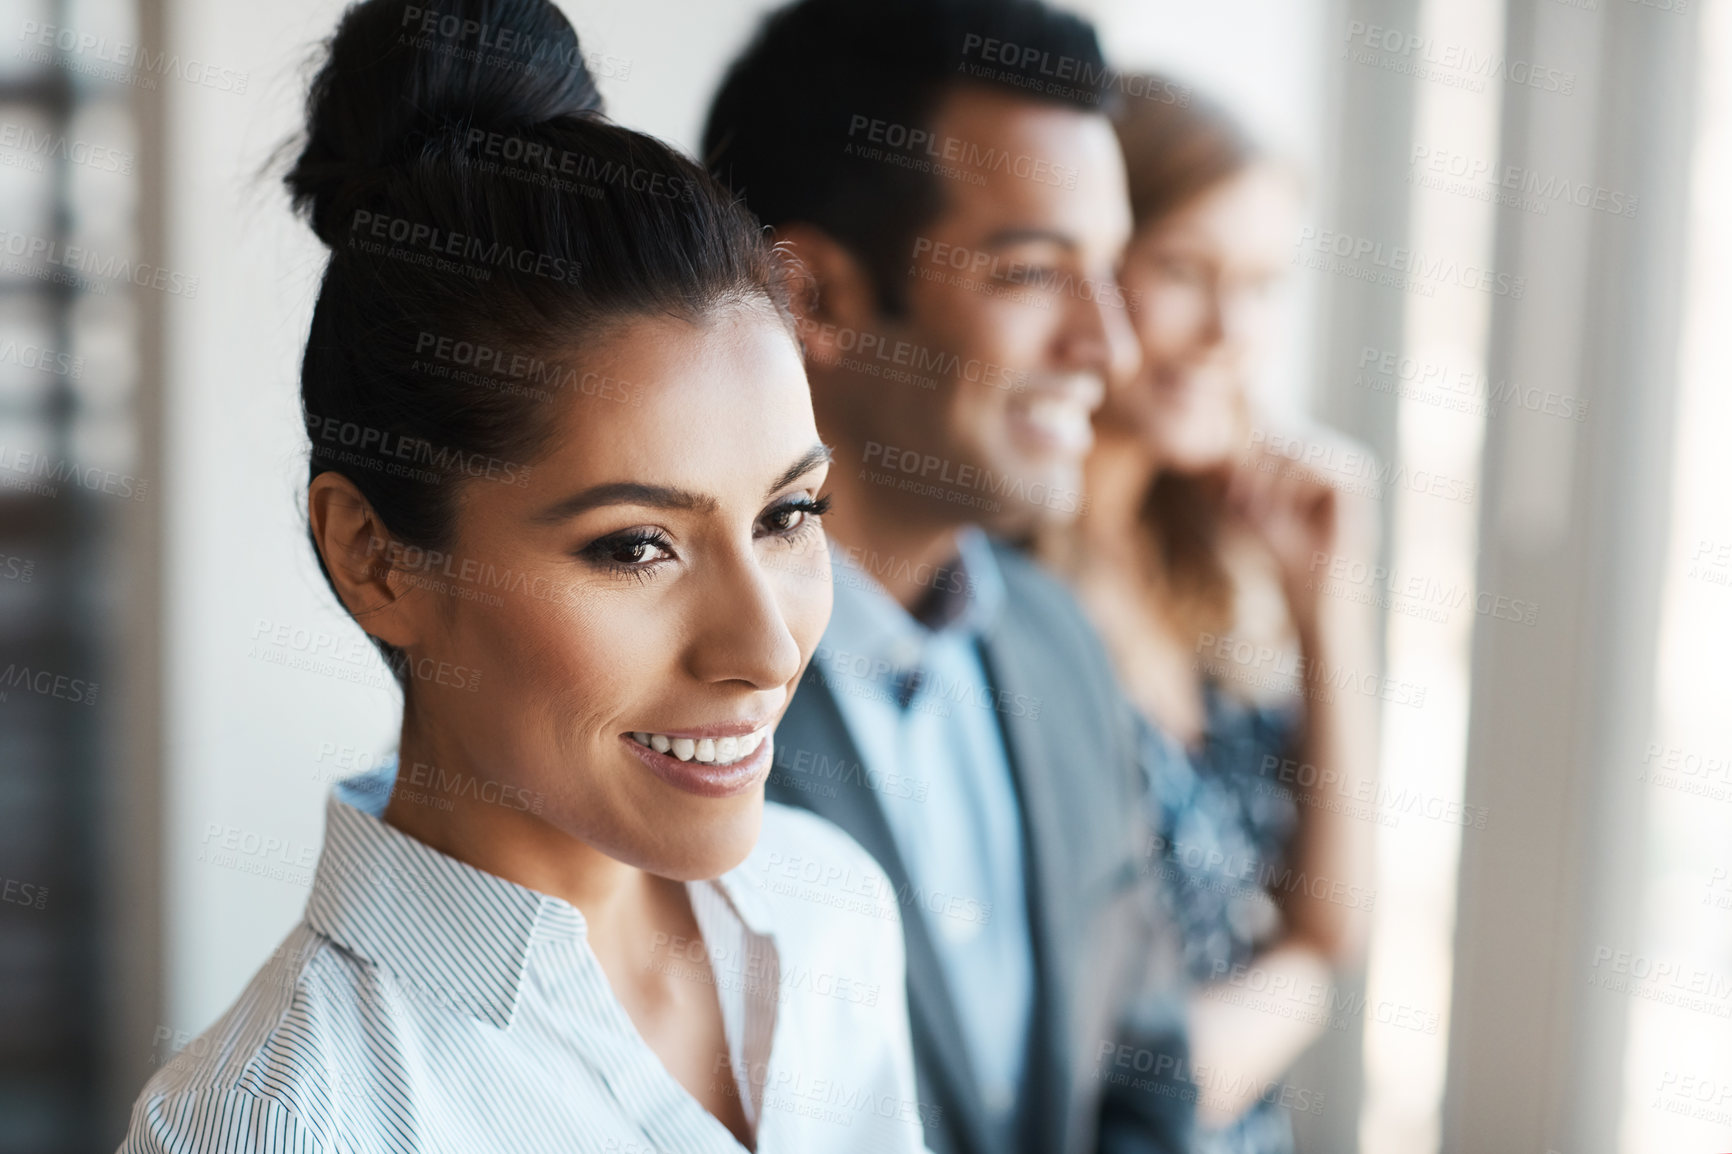 Buy stock photo Shot of a young businesswoman standing in an office with her colleagues in the background